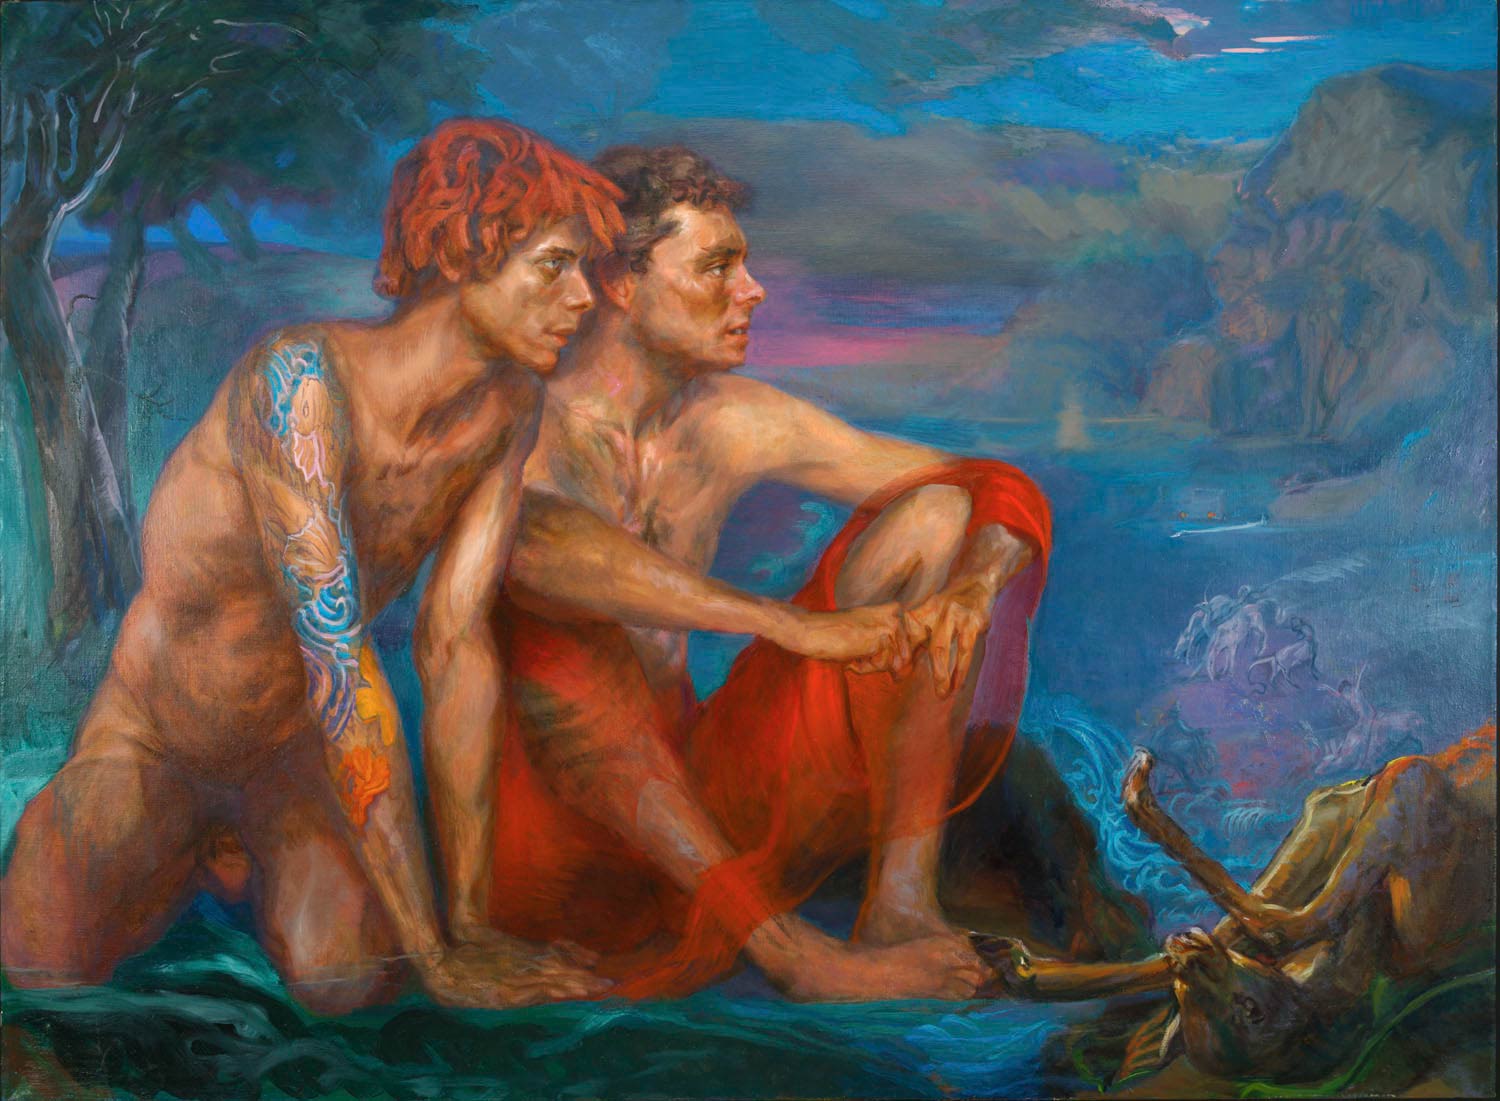 Tatoos 48 x 60 in oil canvas 1999